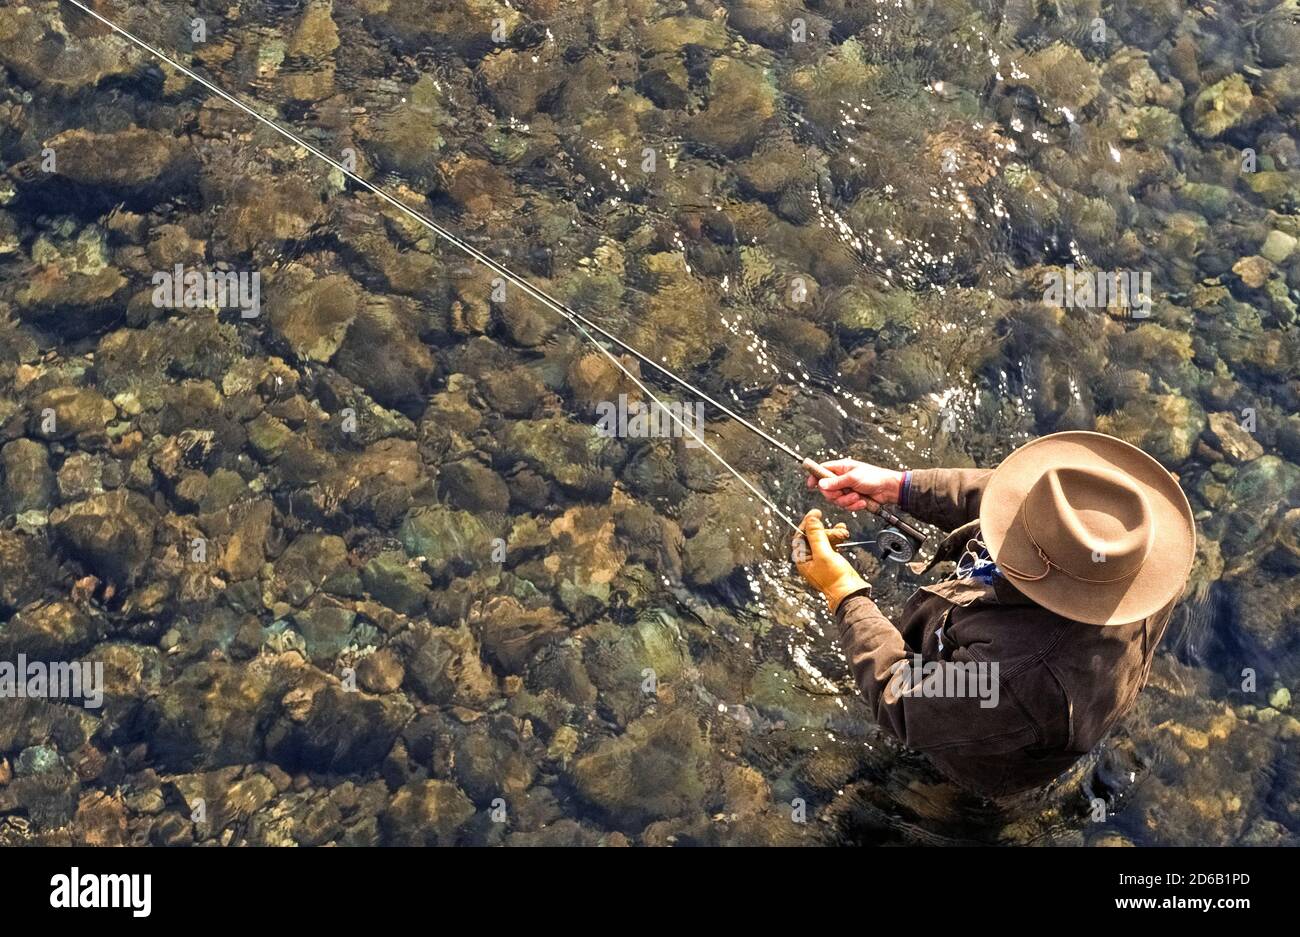 Viewed from overhead is a fly fisherman standing in the crystal-clear water of a mountain river near Sun Valley, Idaho, USA. Anglers especially enjoy casting with their fly rods into the clean freshwater streams and rivers to catch cutthroat, rainbow and other trout species that are plentiful in this scenic northwestern state. Stock Photo